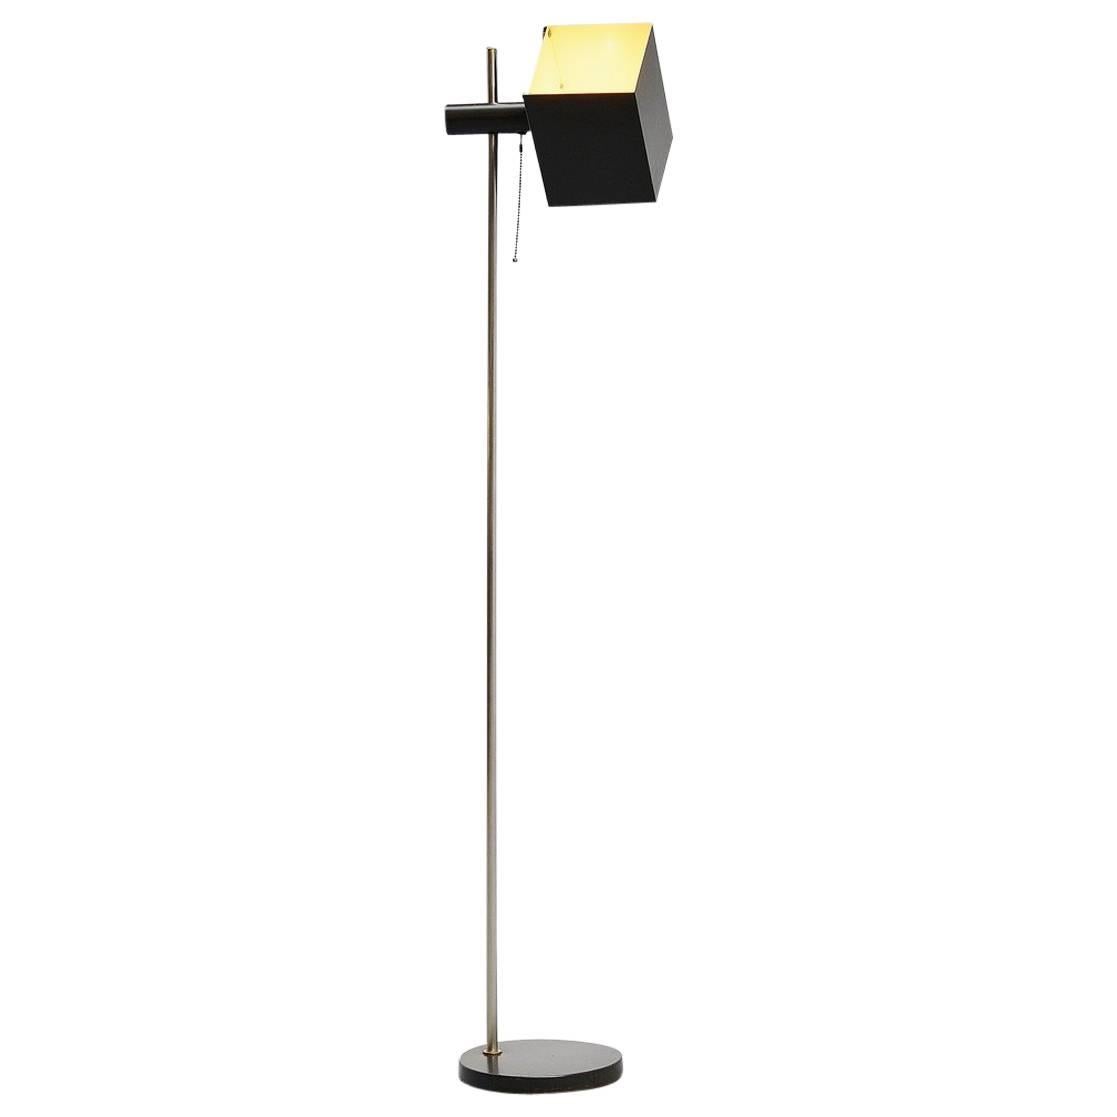 Modernist Floor Lamp with Cubic Rotatable Shade, 1960